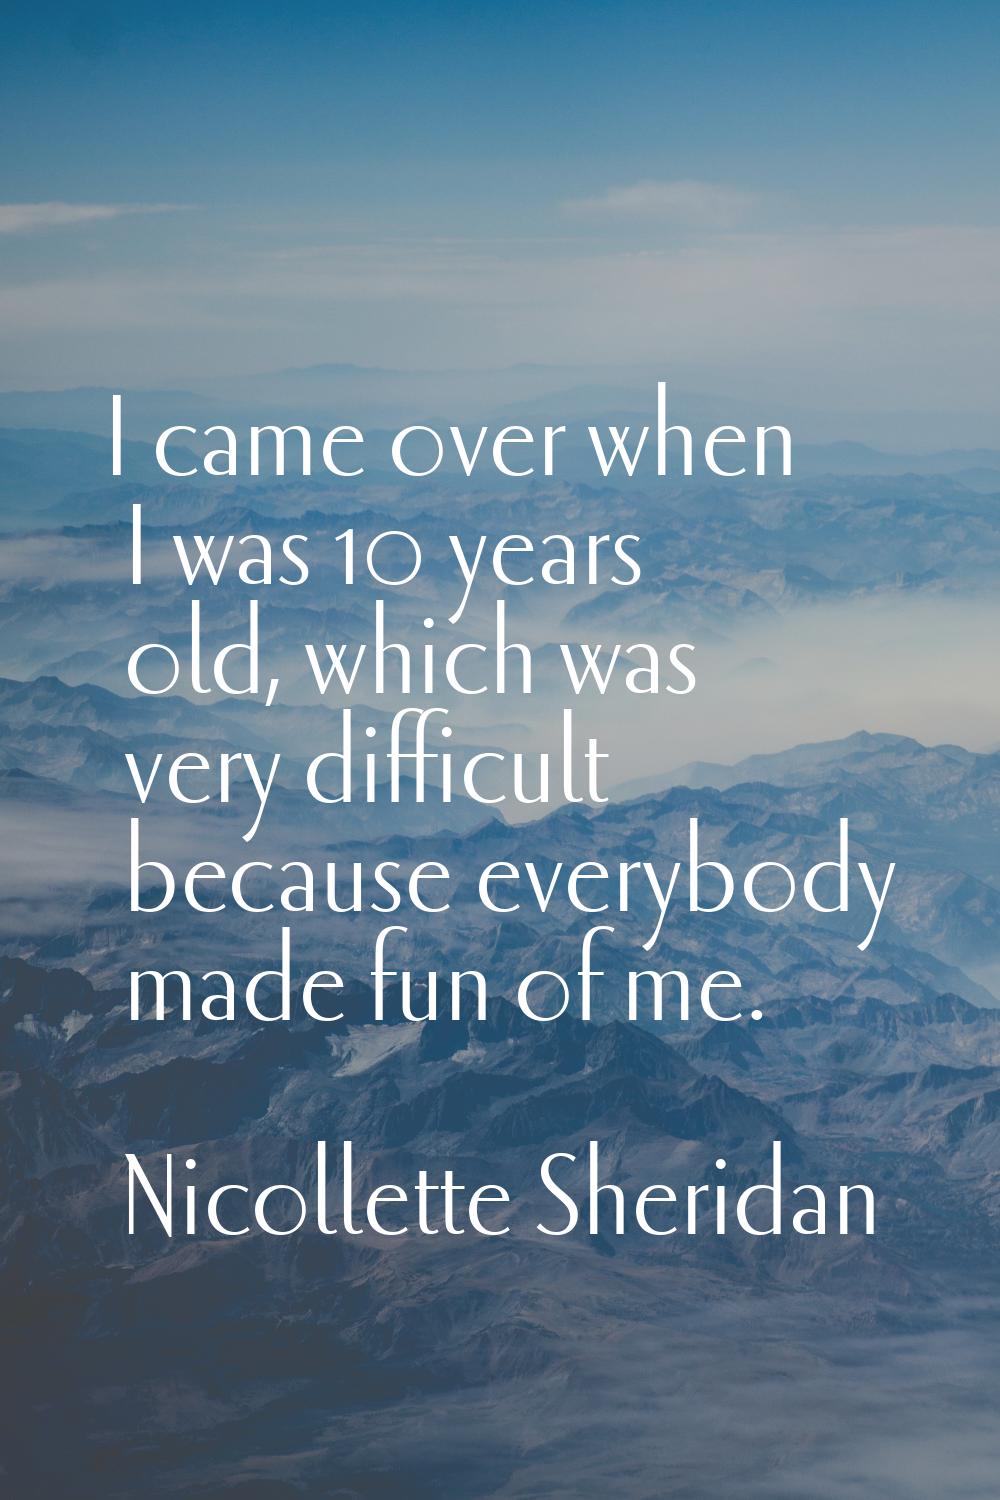 I came over when I was 10 years old, which was very difficult because everybody made fun of me.